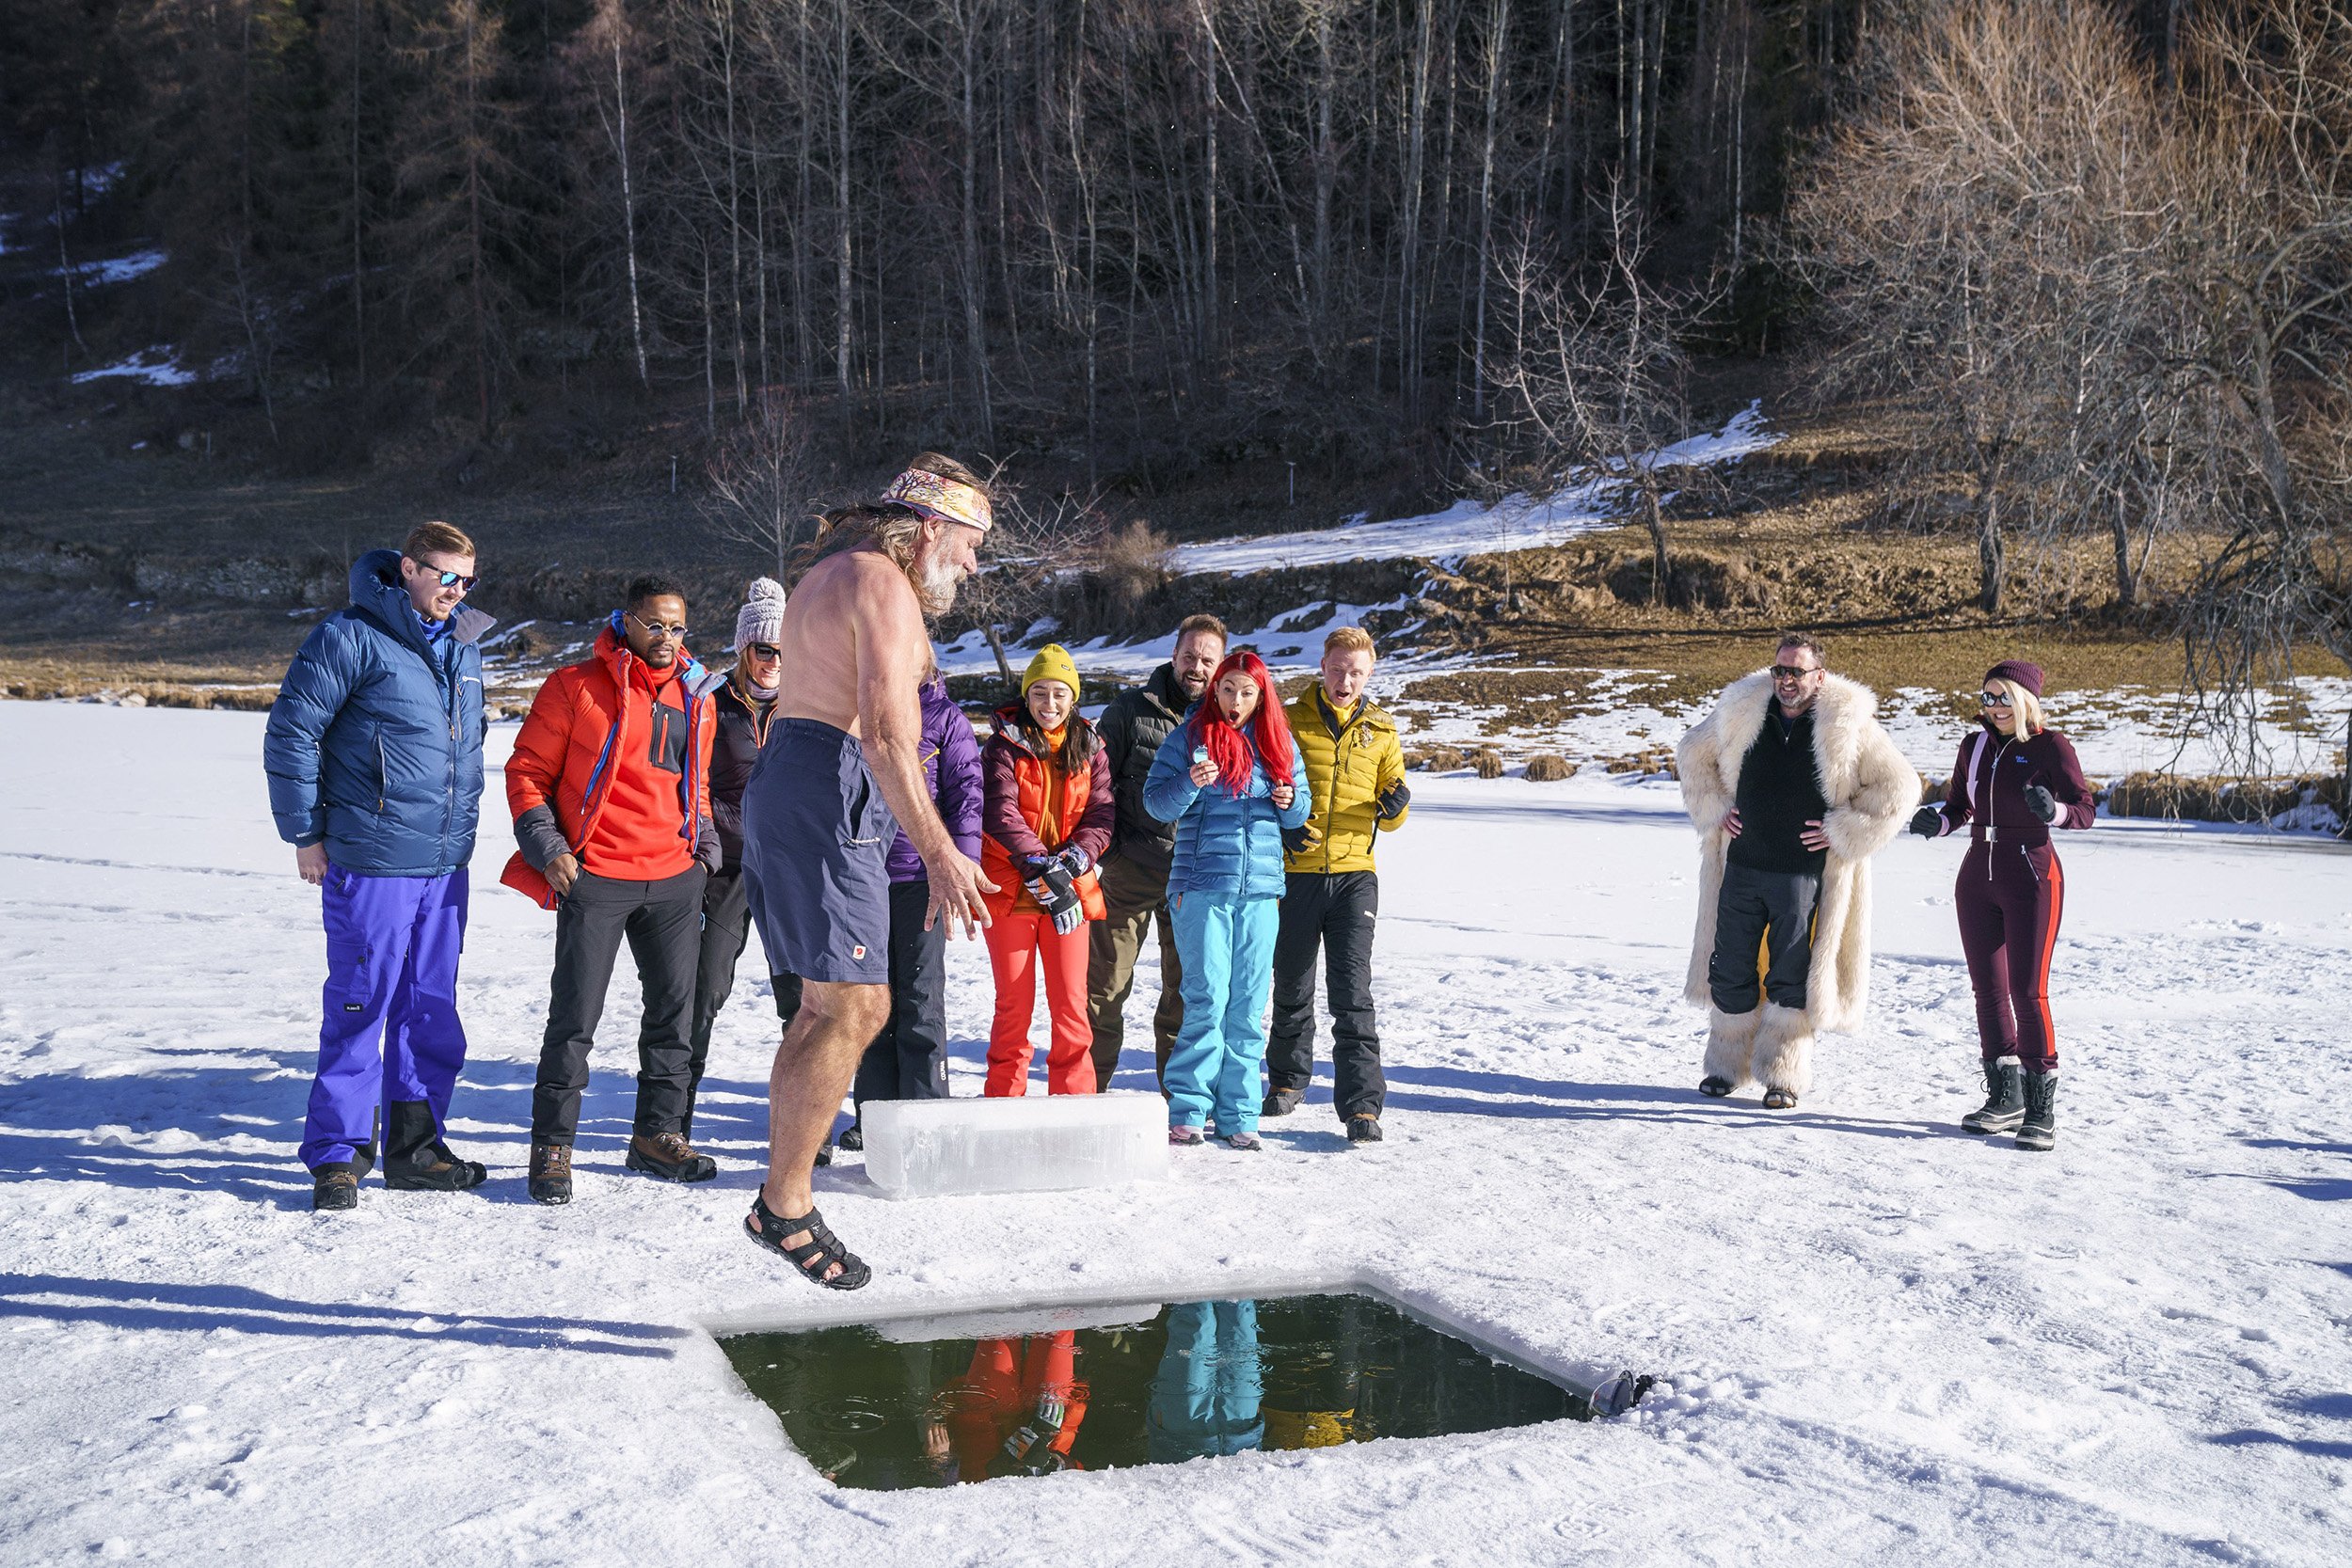  Wim demonstrates jumping into the ice hole after meeting the celebrities  Hungry Bear Media / BBC 